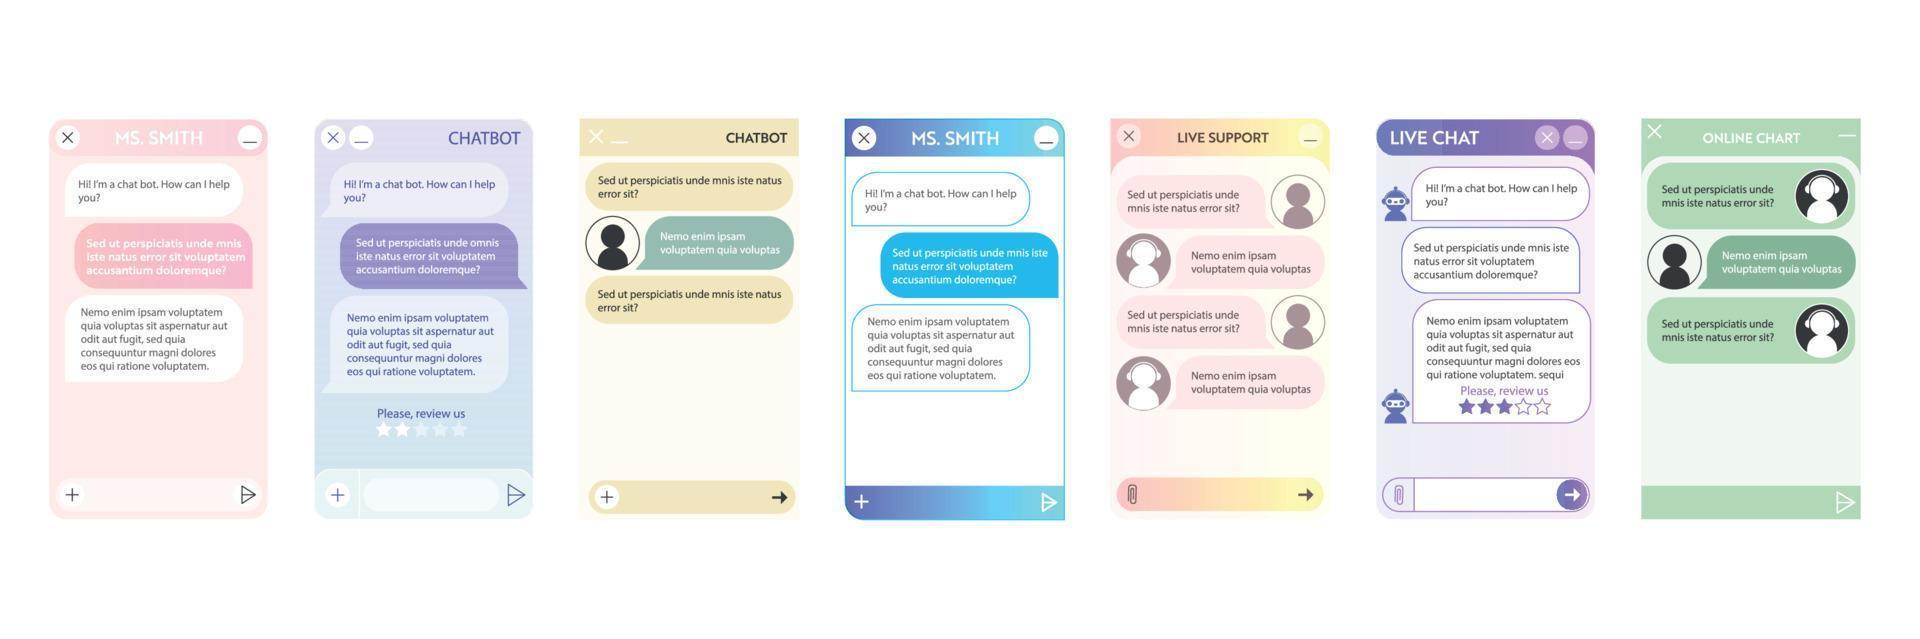 Chatbot window set. User interface of application with online dialogue. Conversation with a robot assistant vector